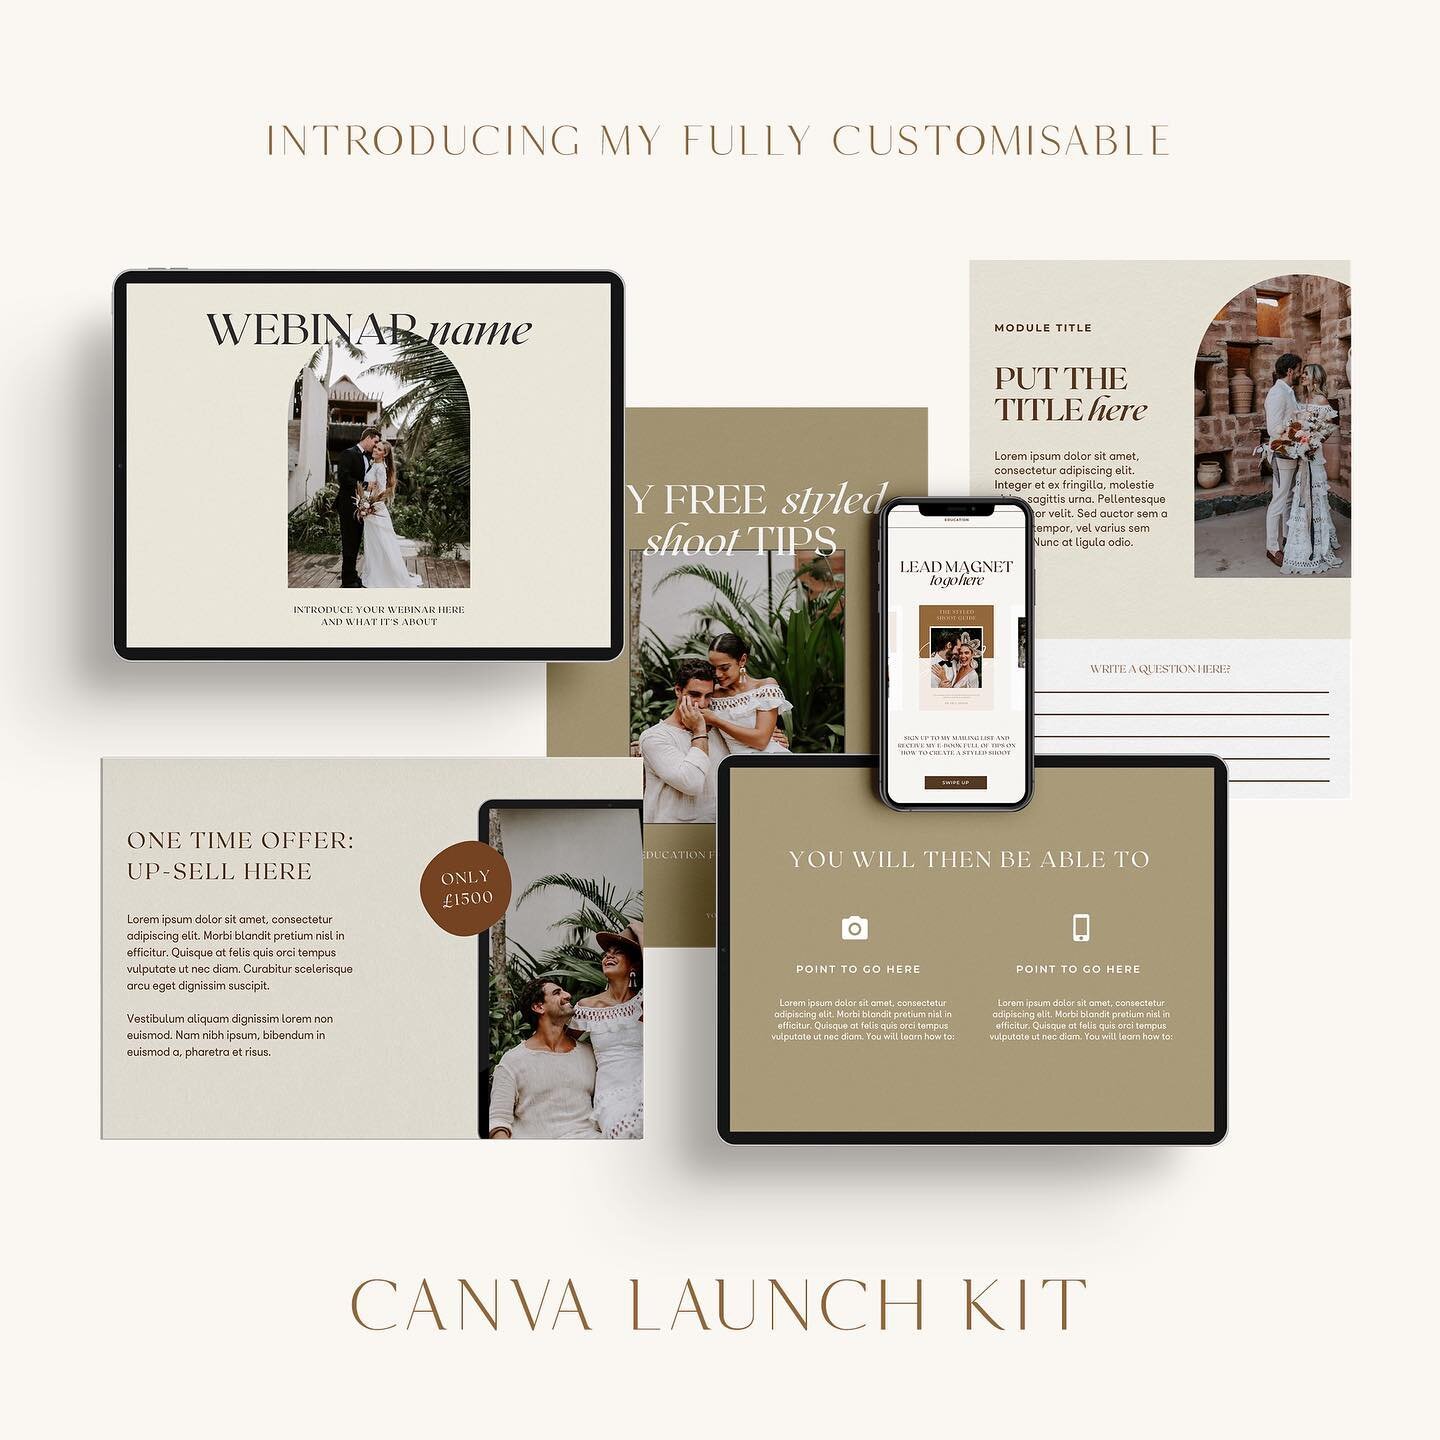 Just released CANVA LAUNCH KIT is in the shop! 💫

Let&rsquo;s make launching as easy as possible- all the graphics you need to launch your digital product.
This isn&rsquo;t your average template bundle, it includes everything you need to launch your